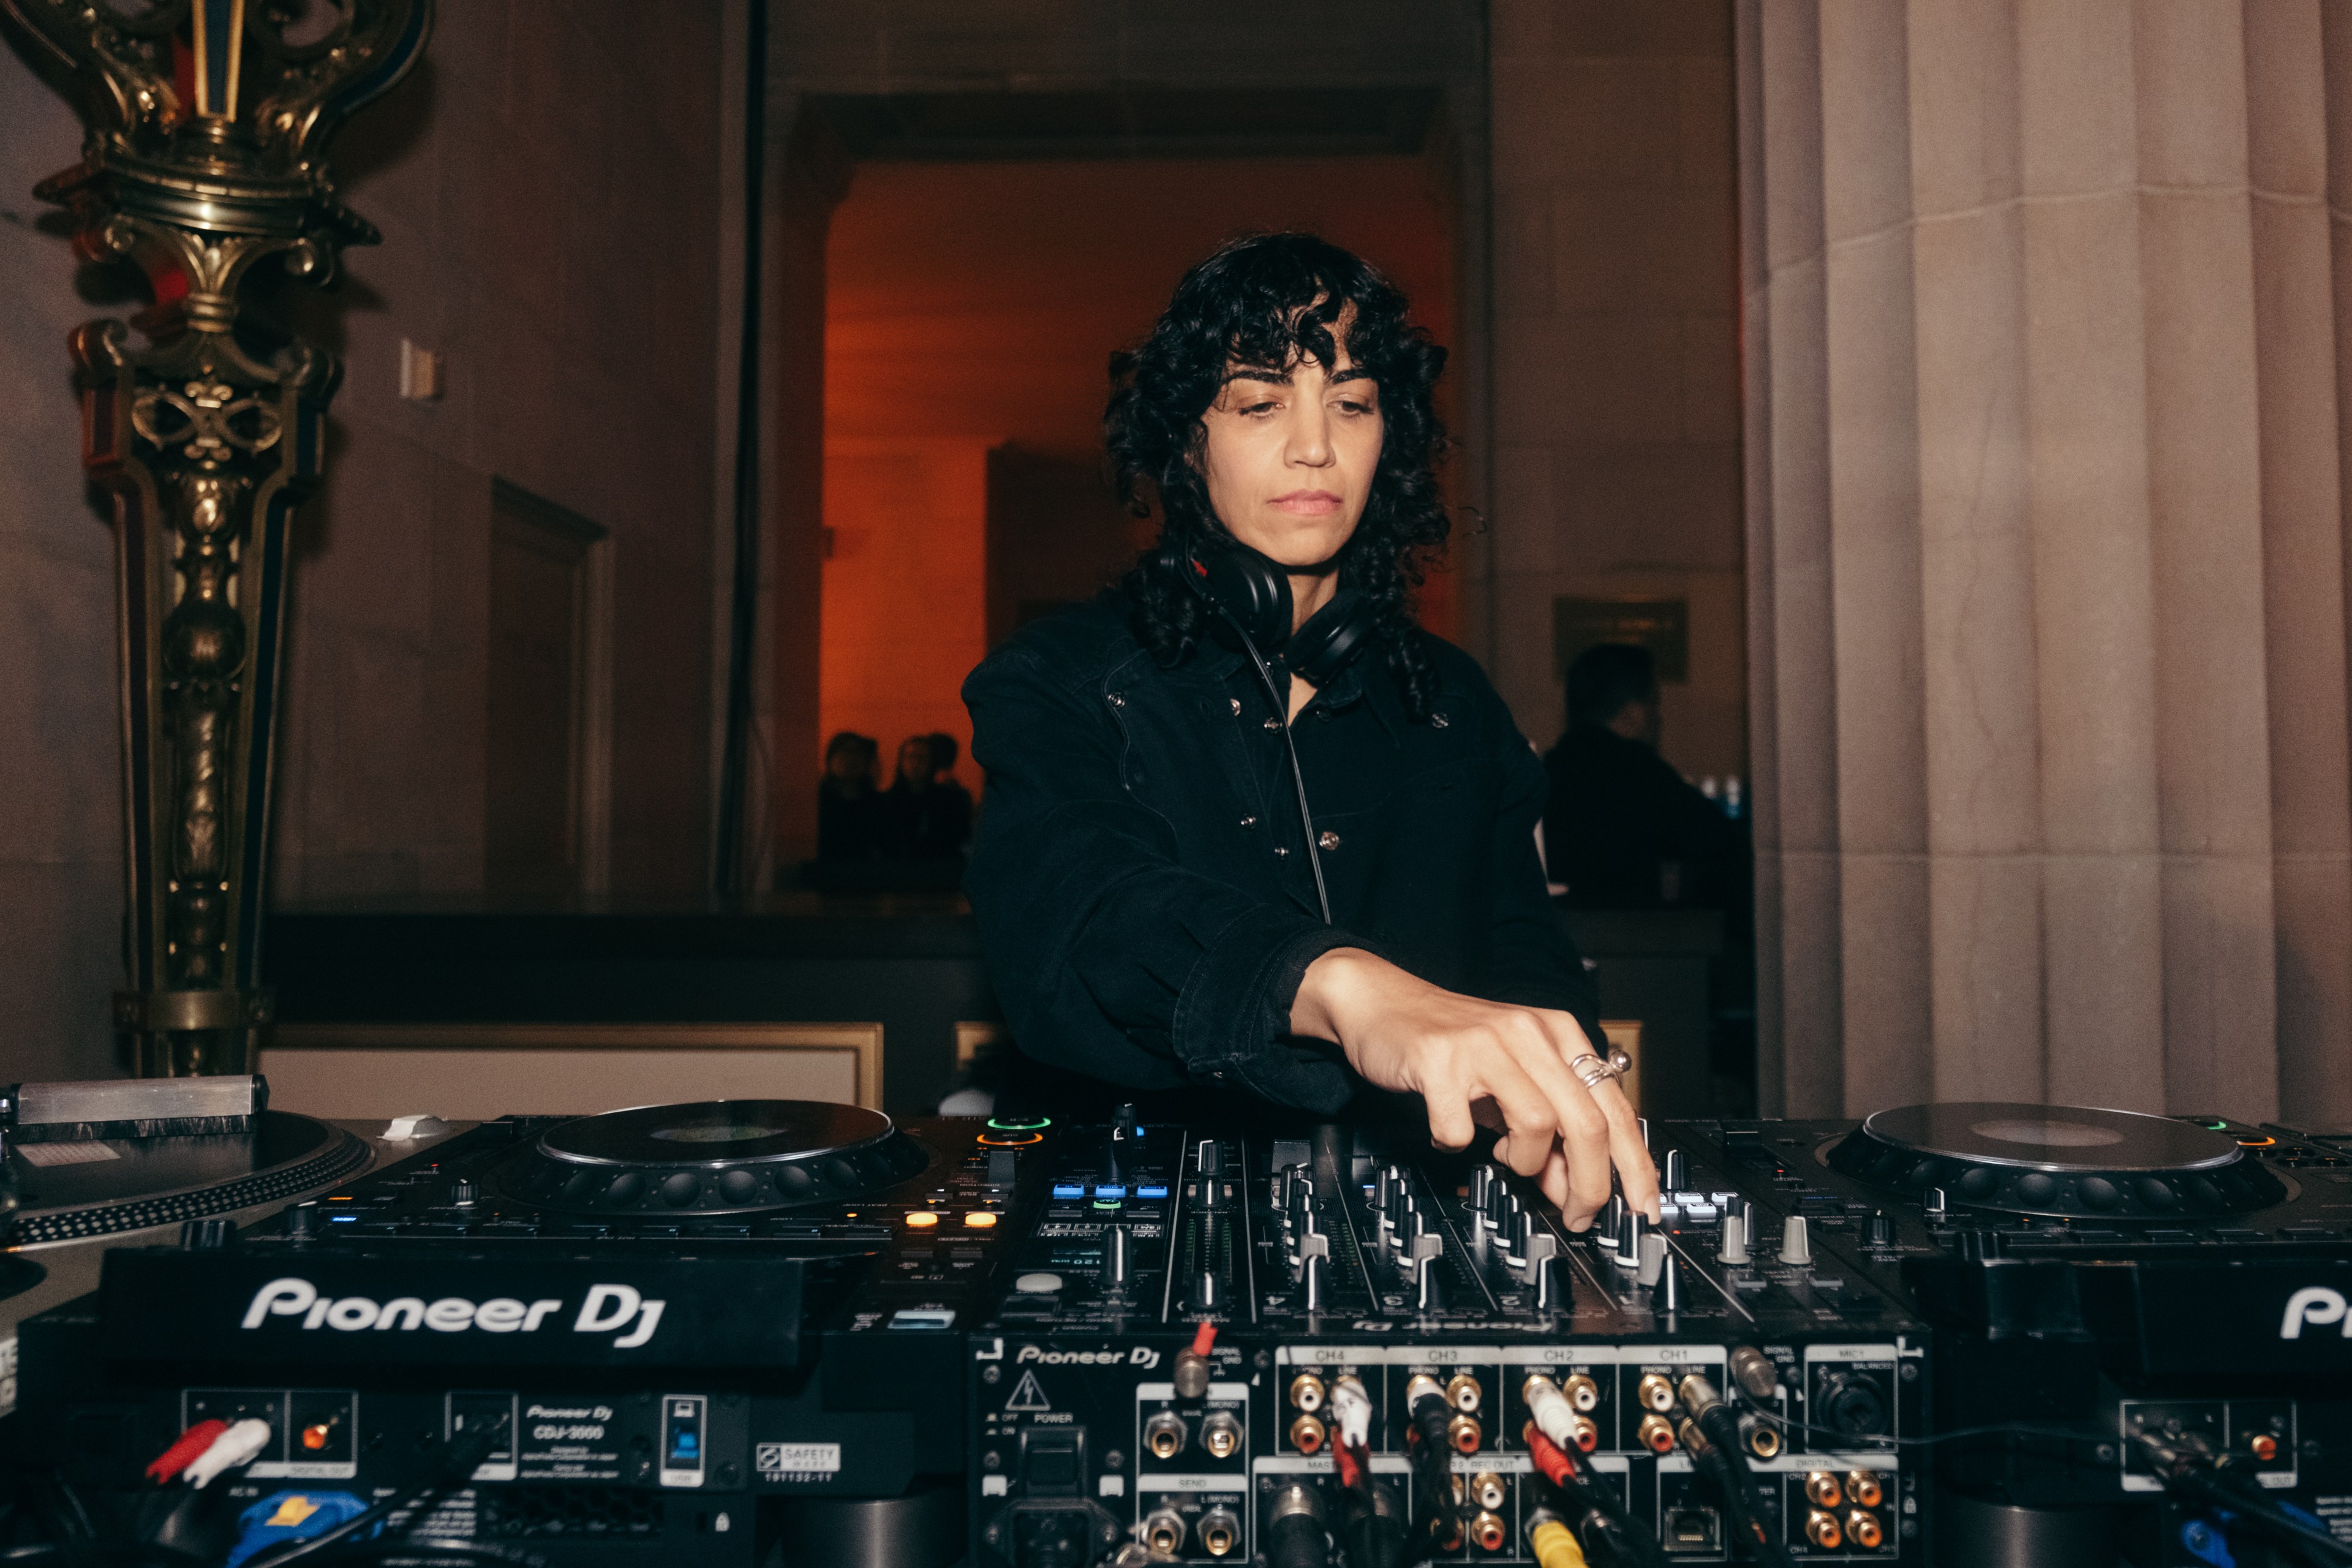 A DJ with curly hair mixes tracks on a Pioneer setup in a warmly lit event space.